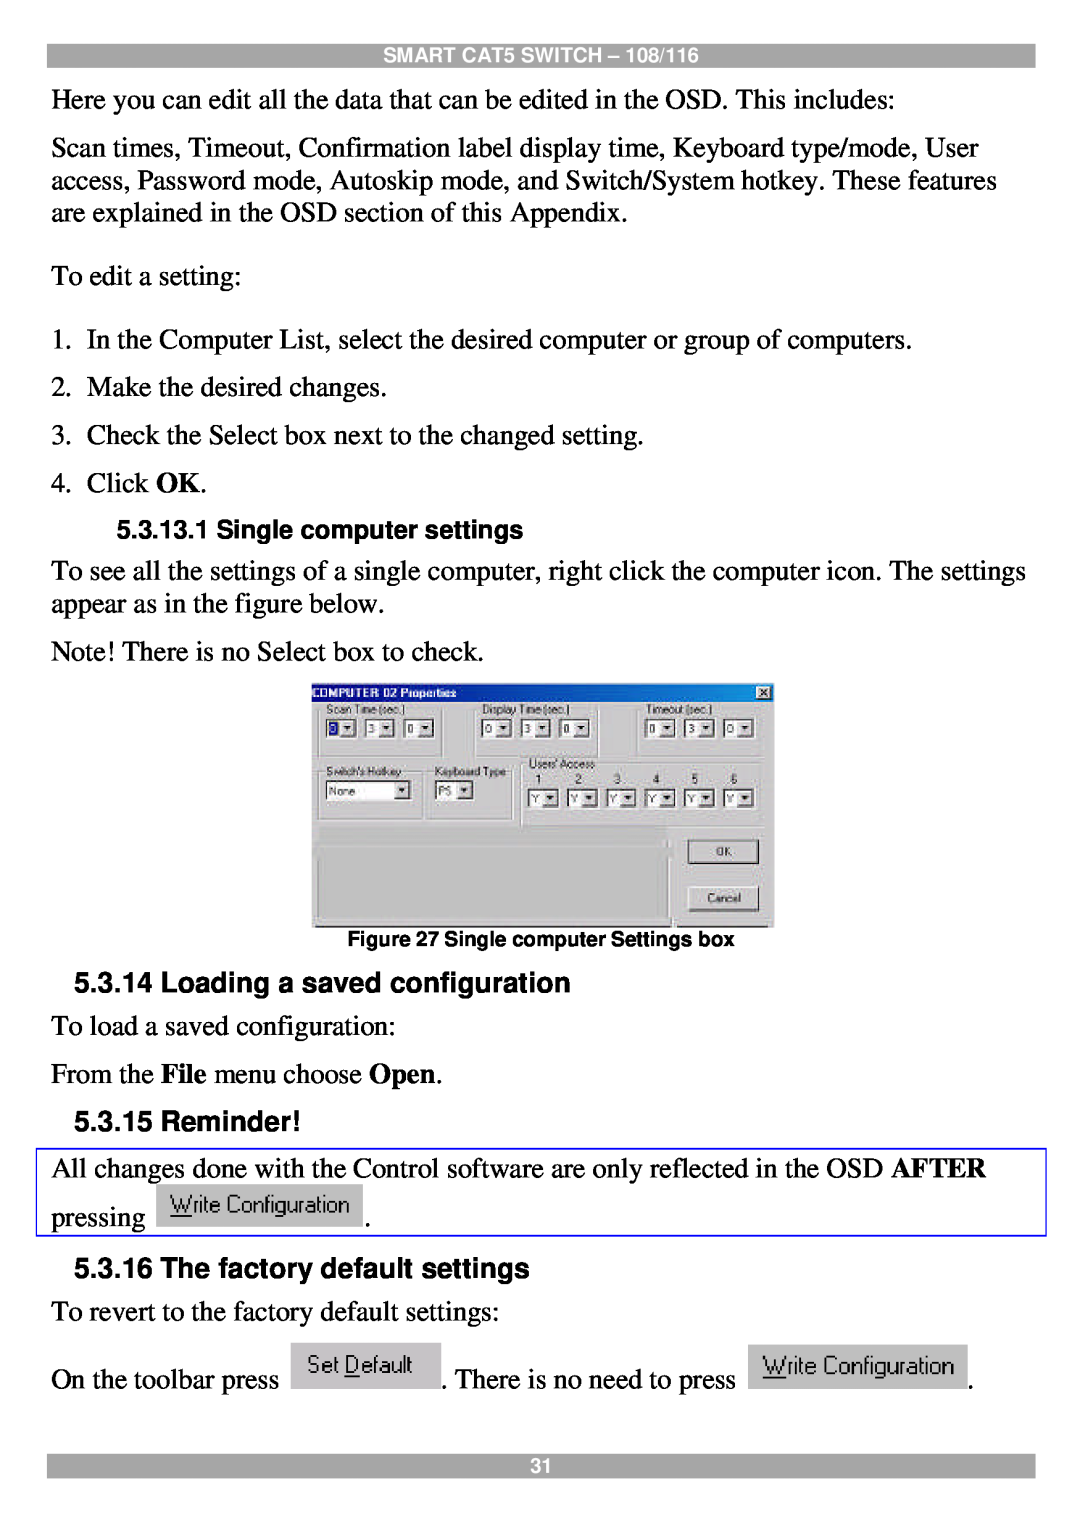 Tripp Lite 108, 116 manual Loading a saved configuration, Reminder, The factory default settings 